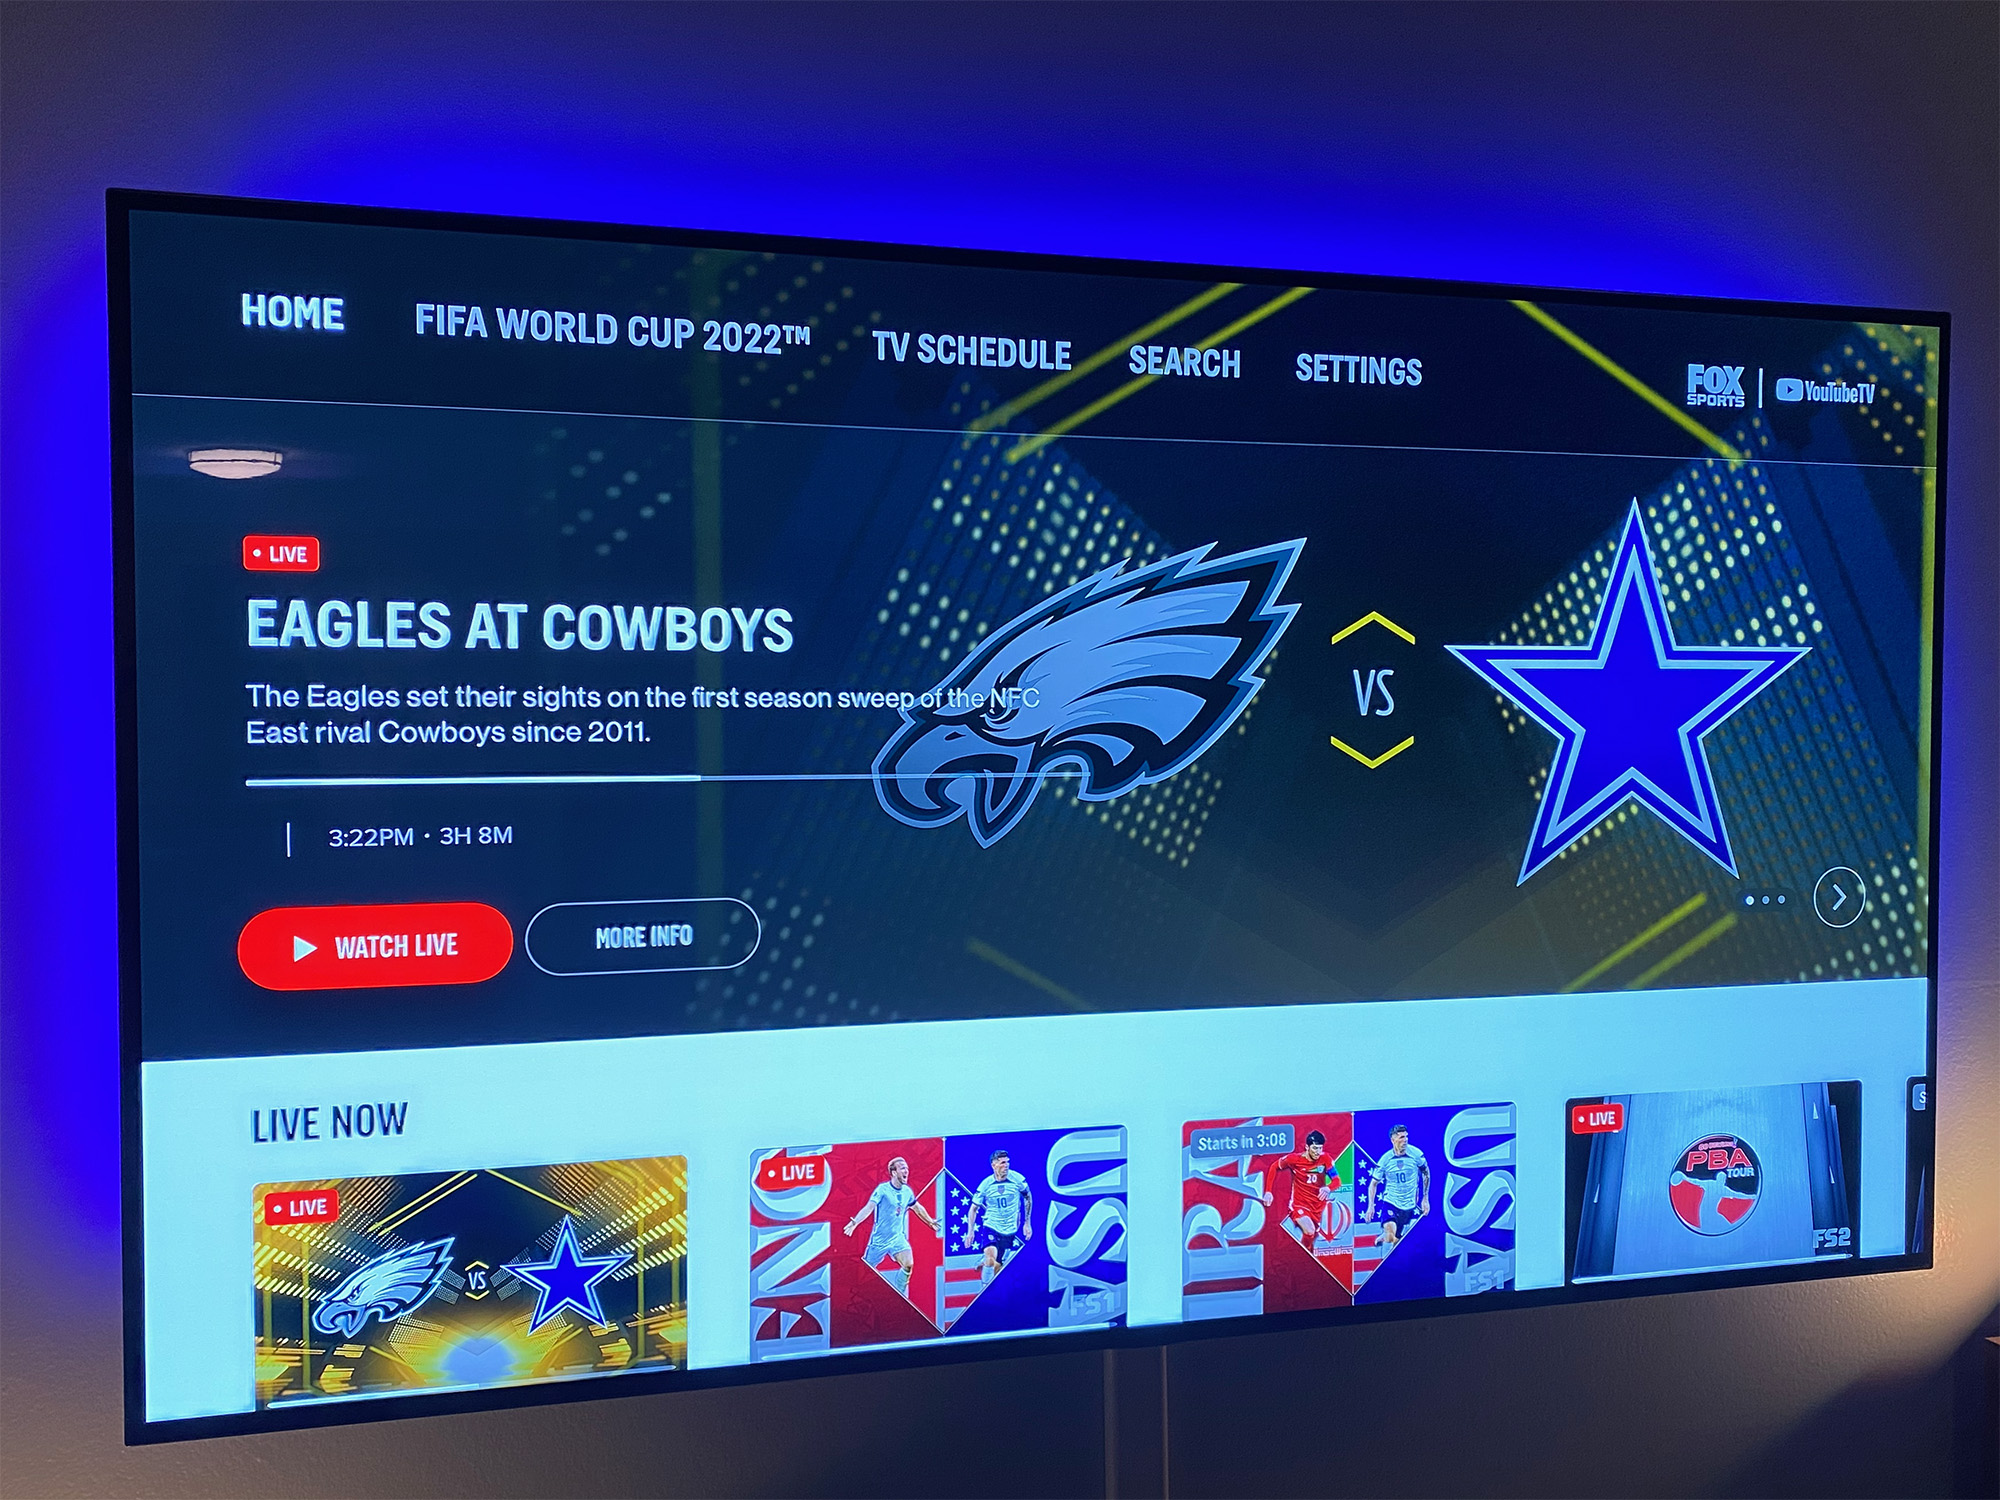 How To Watch NFL Games On Fox For Free